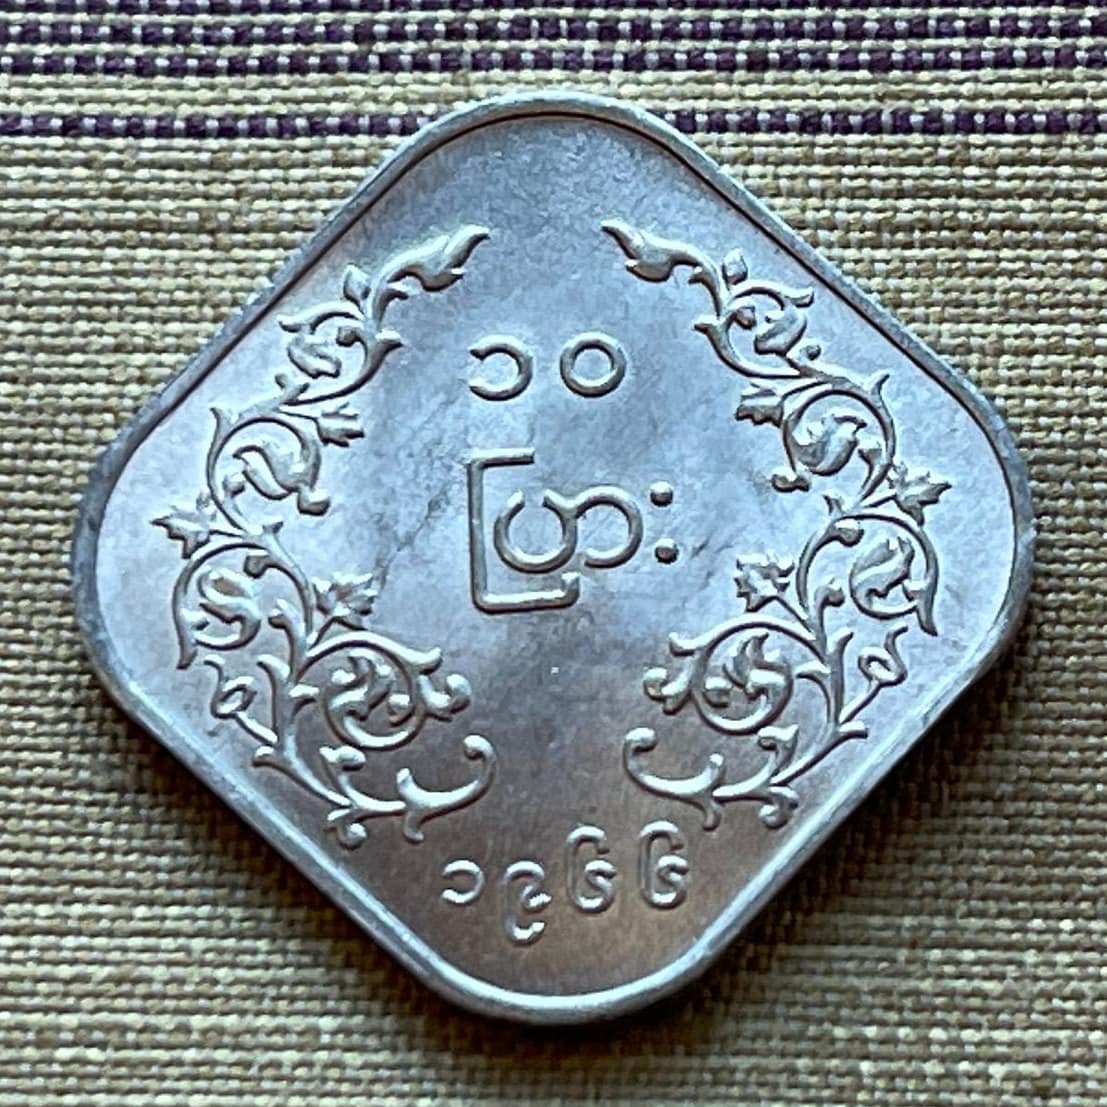 Aung San 10 Pyas Myanmar Authentic Coin Money for Jewelry and Craft Making (Freedom Fighter) (Revolutionary) (Square Coin)